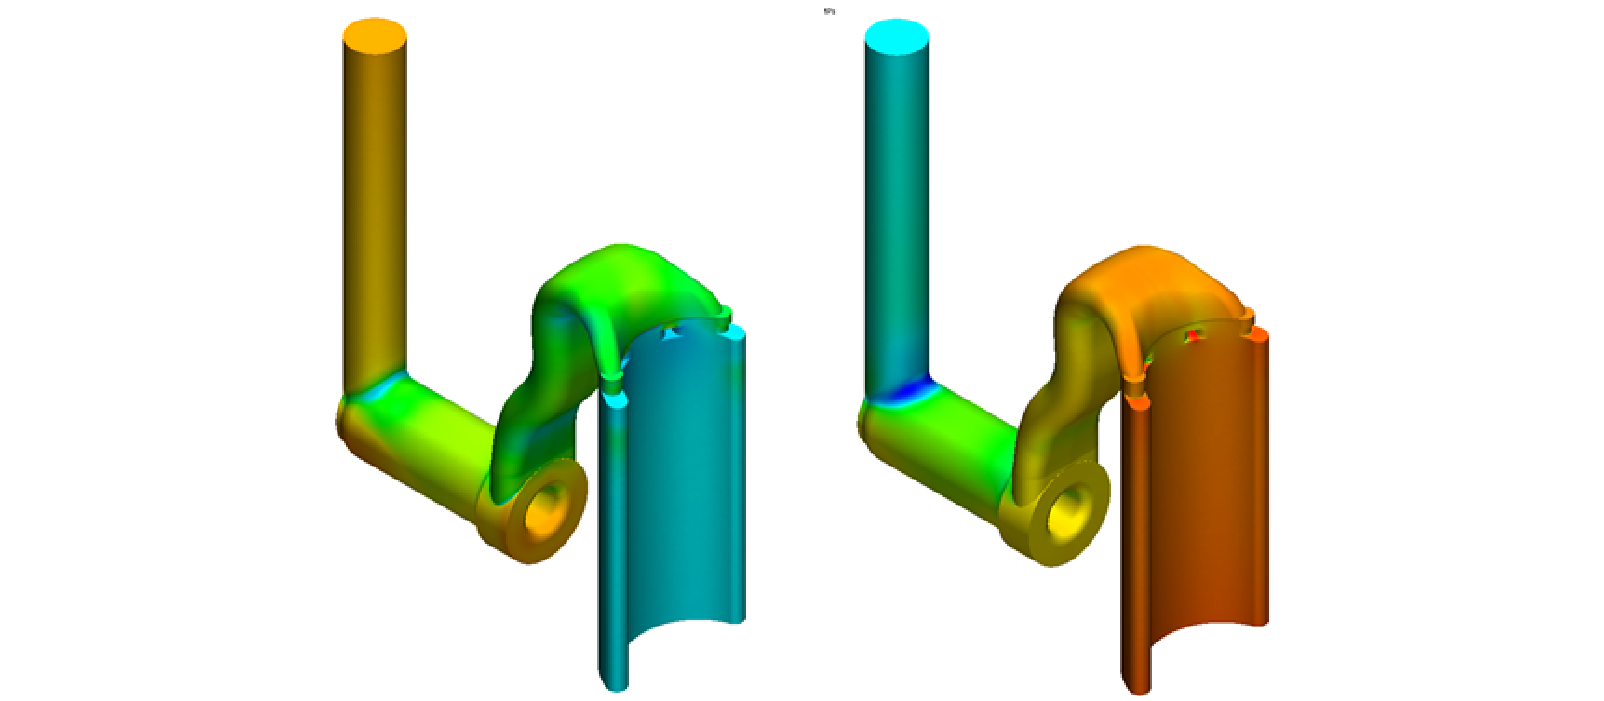 The CFD analysis determined the pressure drop for the piston pump in both pump and motor mode. The pressure drop across bends, expansions, constrictions and other discontinuities is dependent on the direction of flow